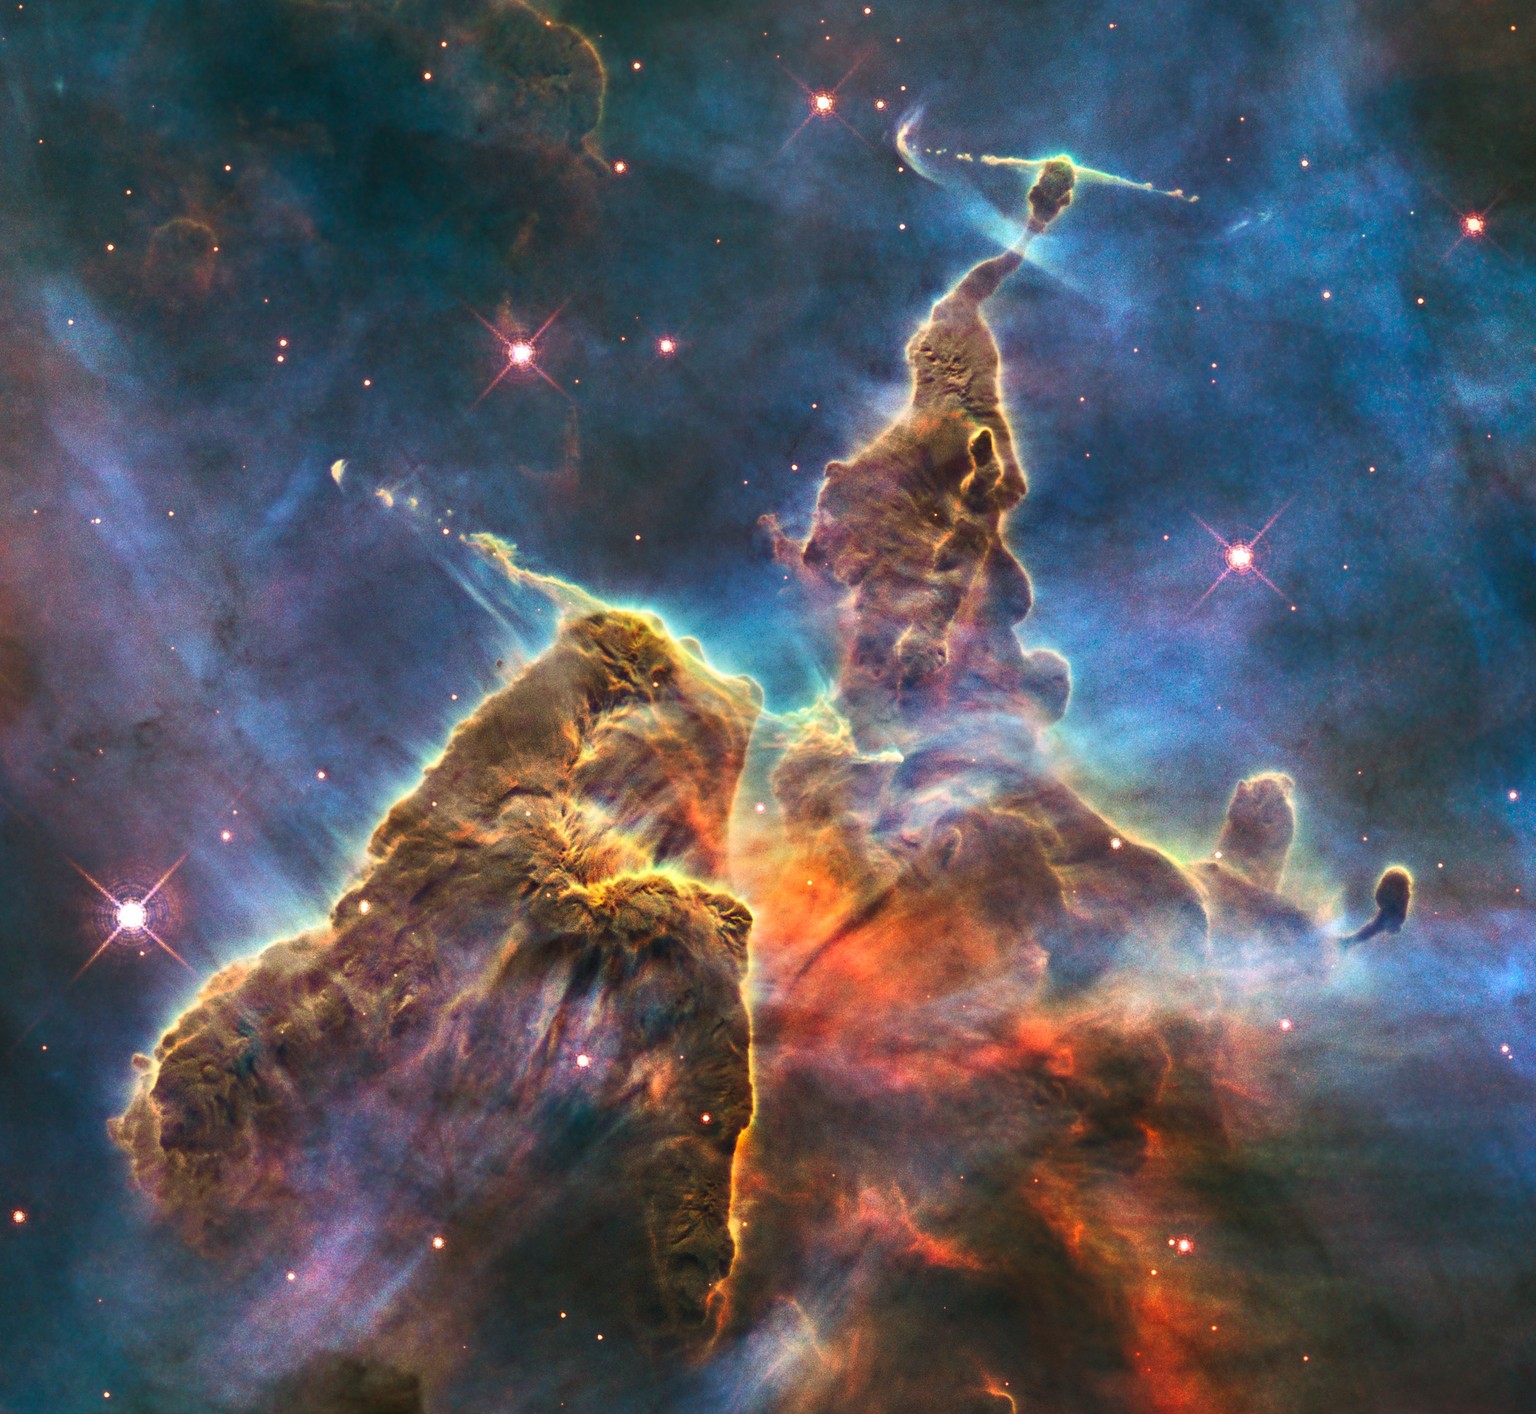 This craggy fantasy mountaintop enshrouded by wispy clouds looks like a bizarre landscape from Tolkien’s The Lord of the Rings. The NASA/ESA Hubble Space Telescope image, which is even more dramatic t ...